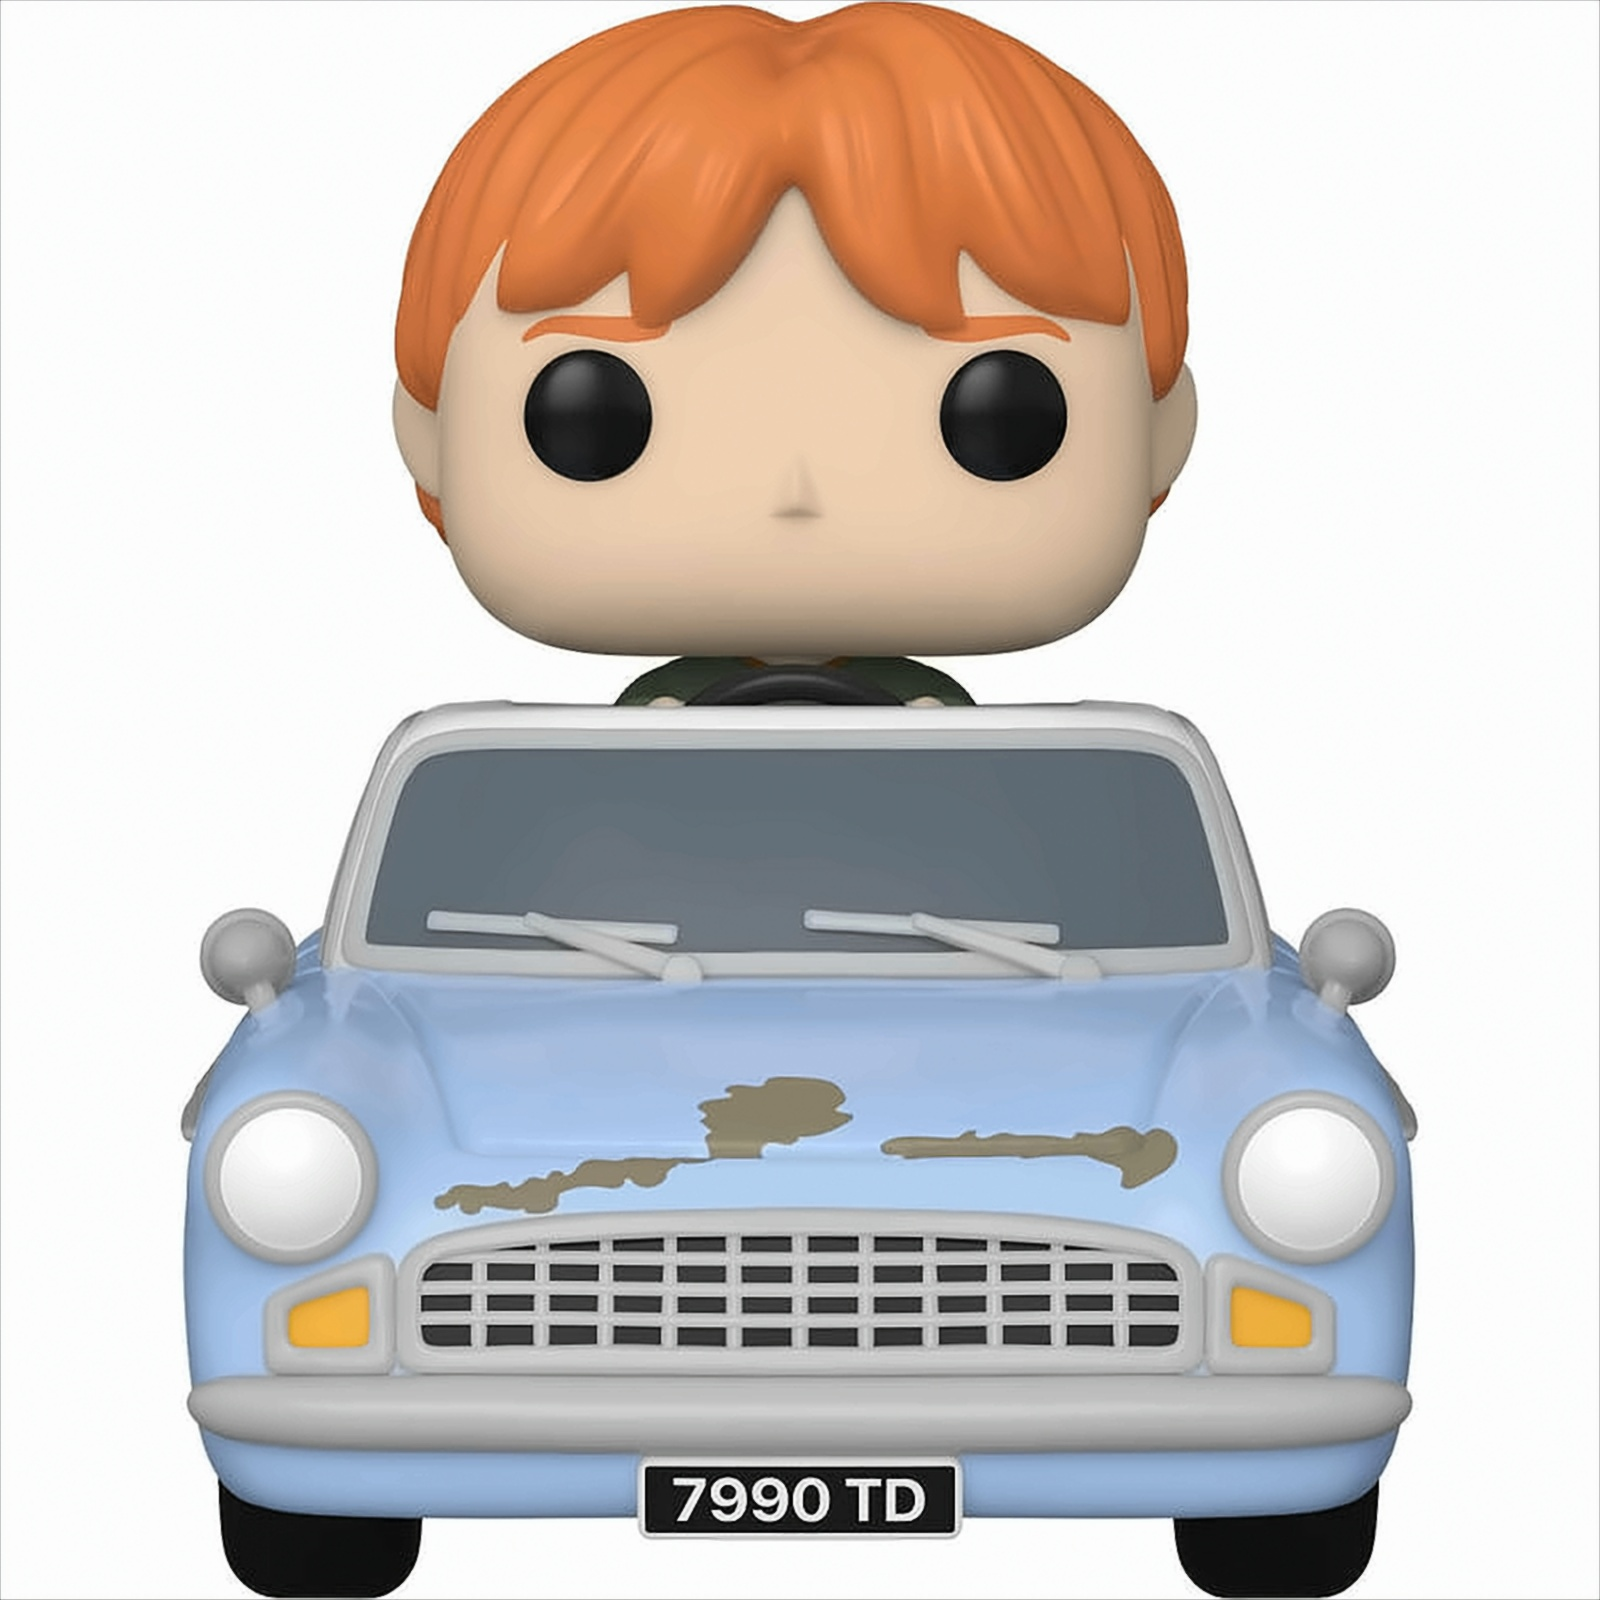 Car Rides - POP in Flying Ron Potter Weasley Harry